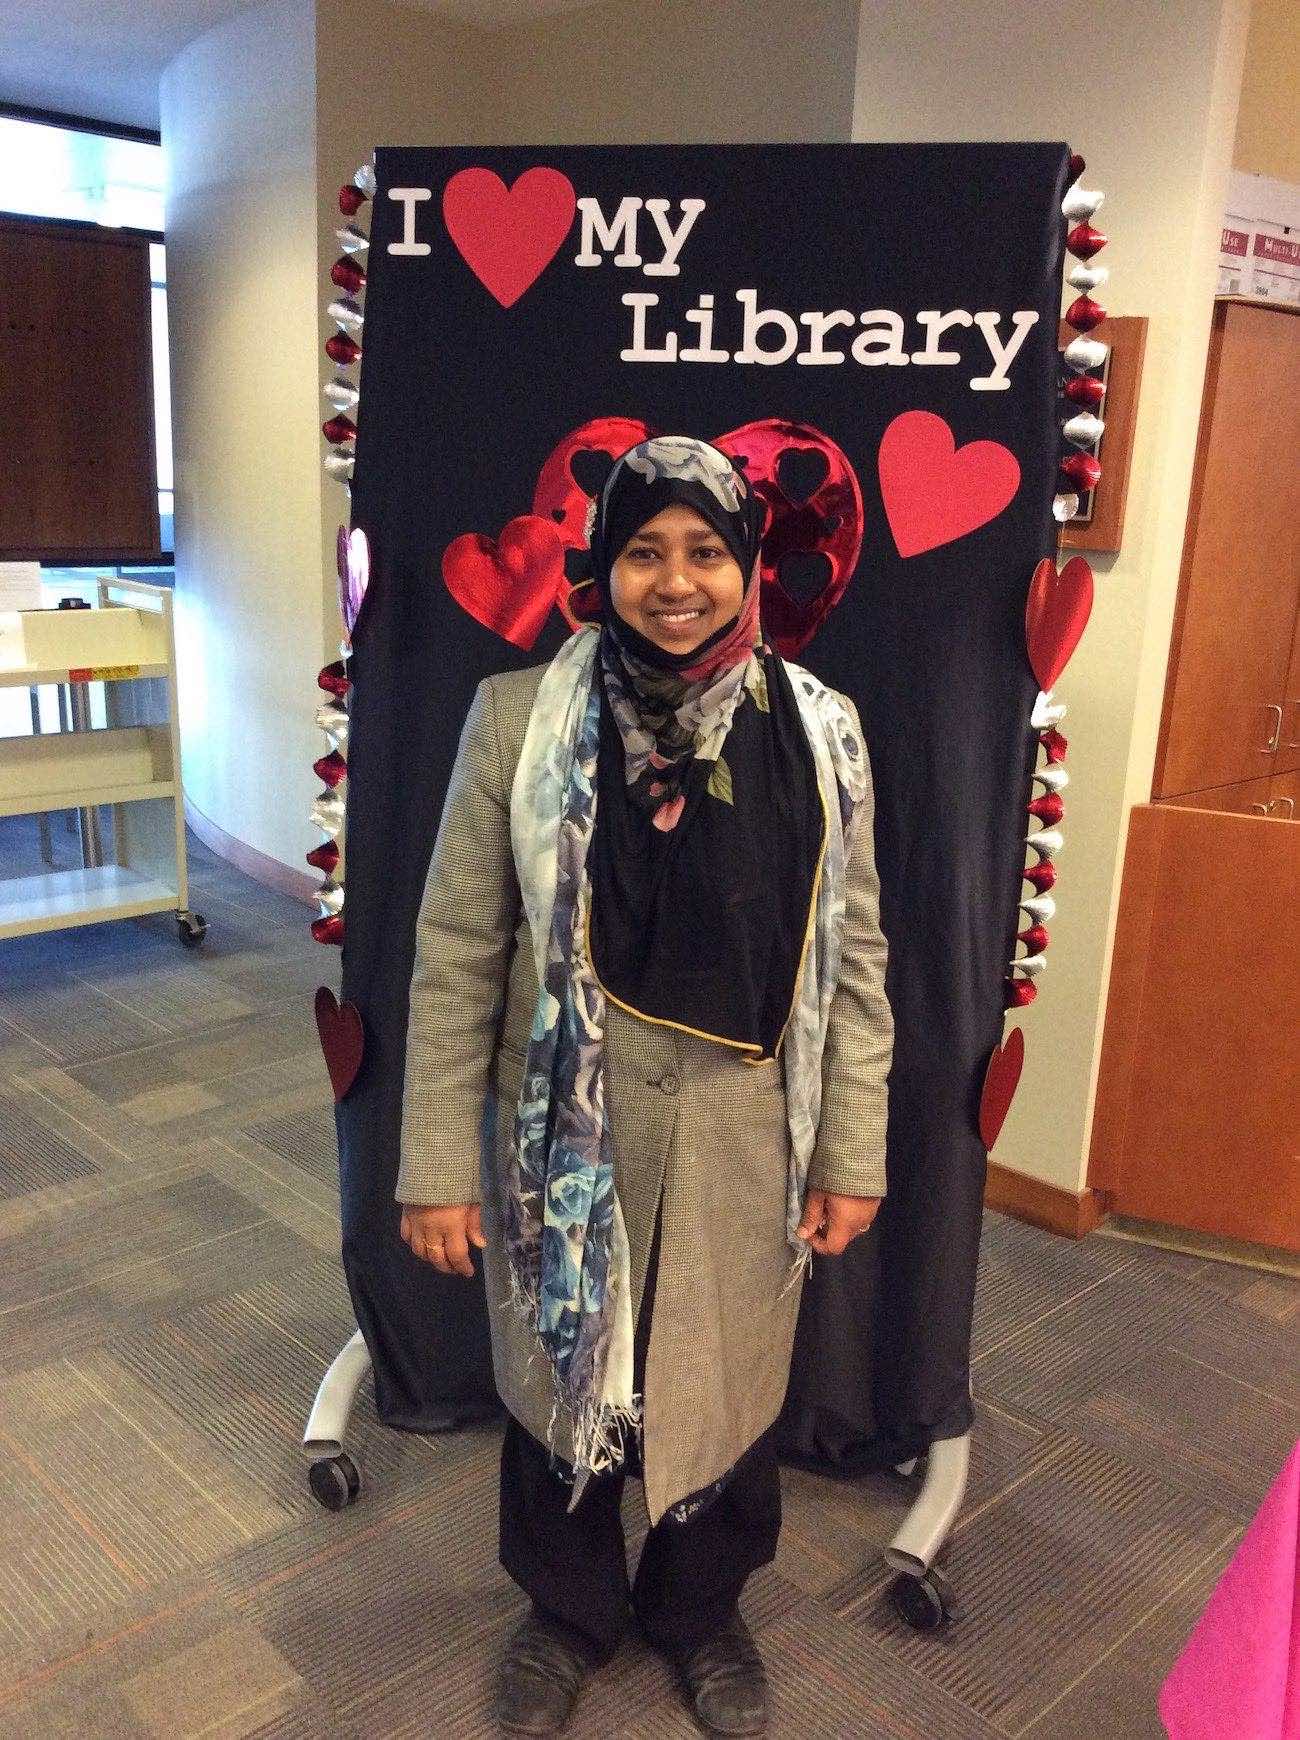 a smiling student in a black and white patterned hijab stands in front of the I love my library backdrop.